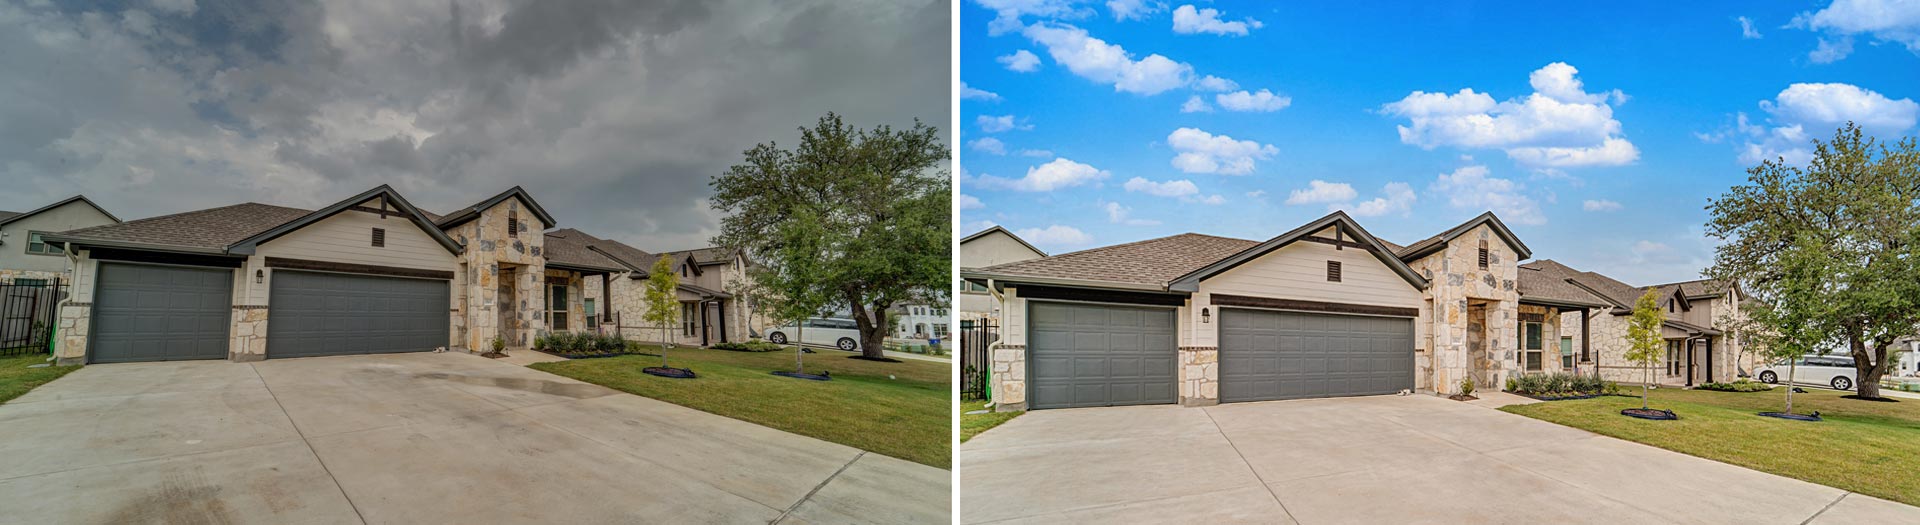 real estate photo editing services add blue sky with clouds